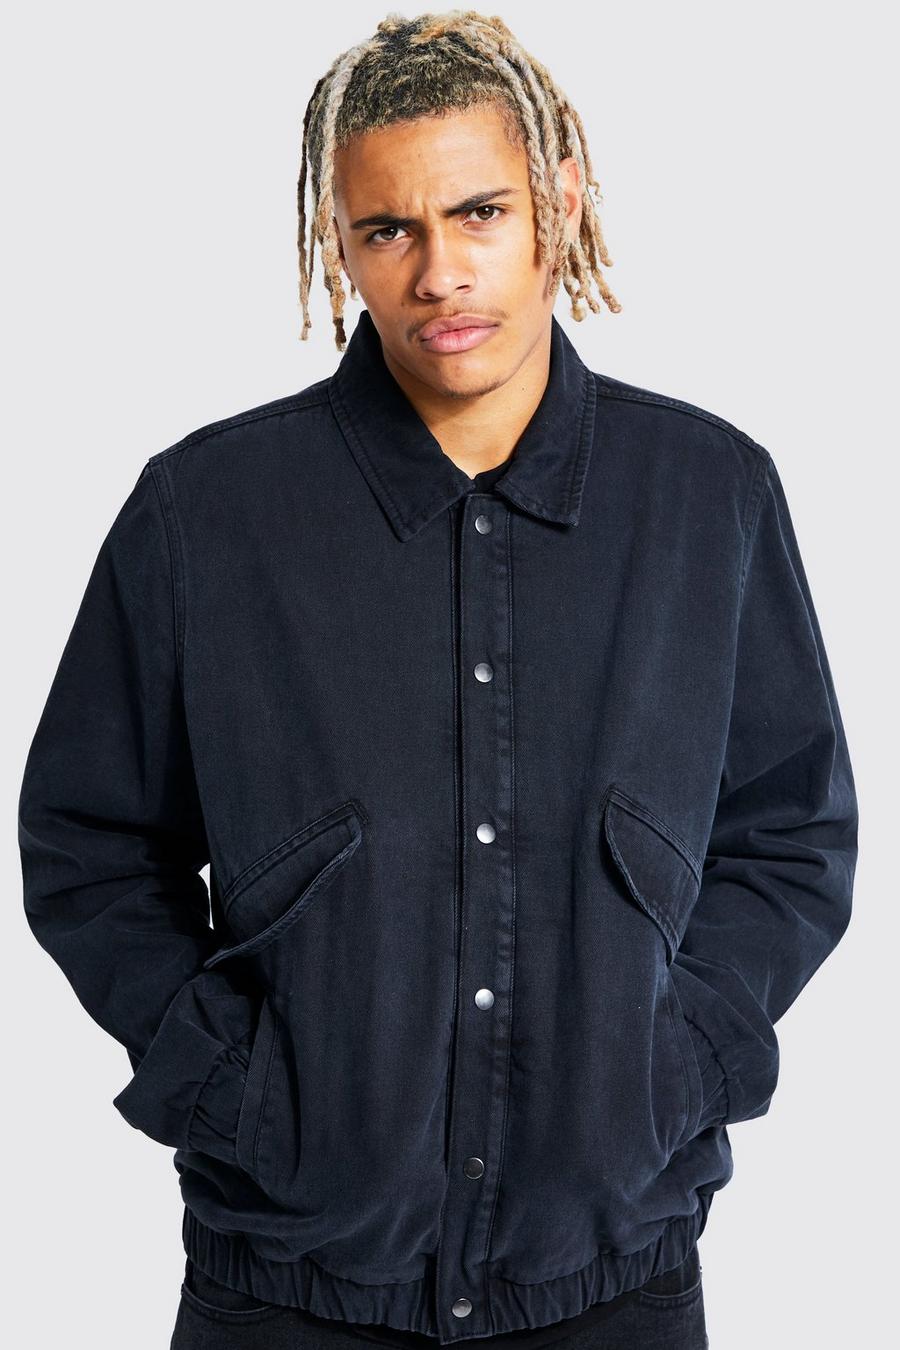 Washed black Tall Boxy Fit Fully Borg Lined Denim Bomber